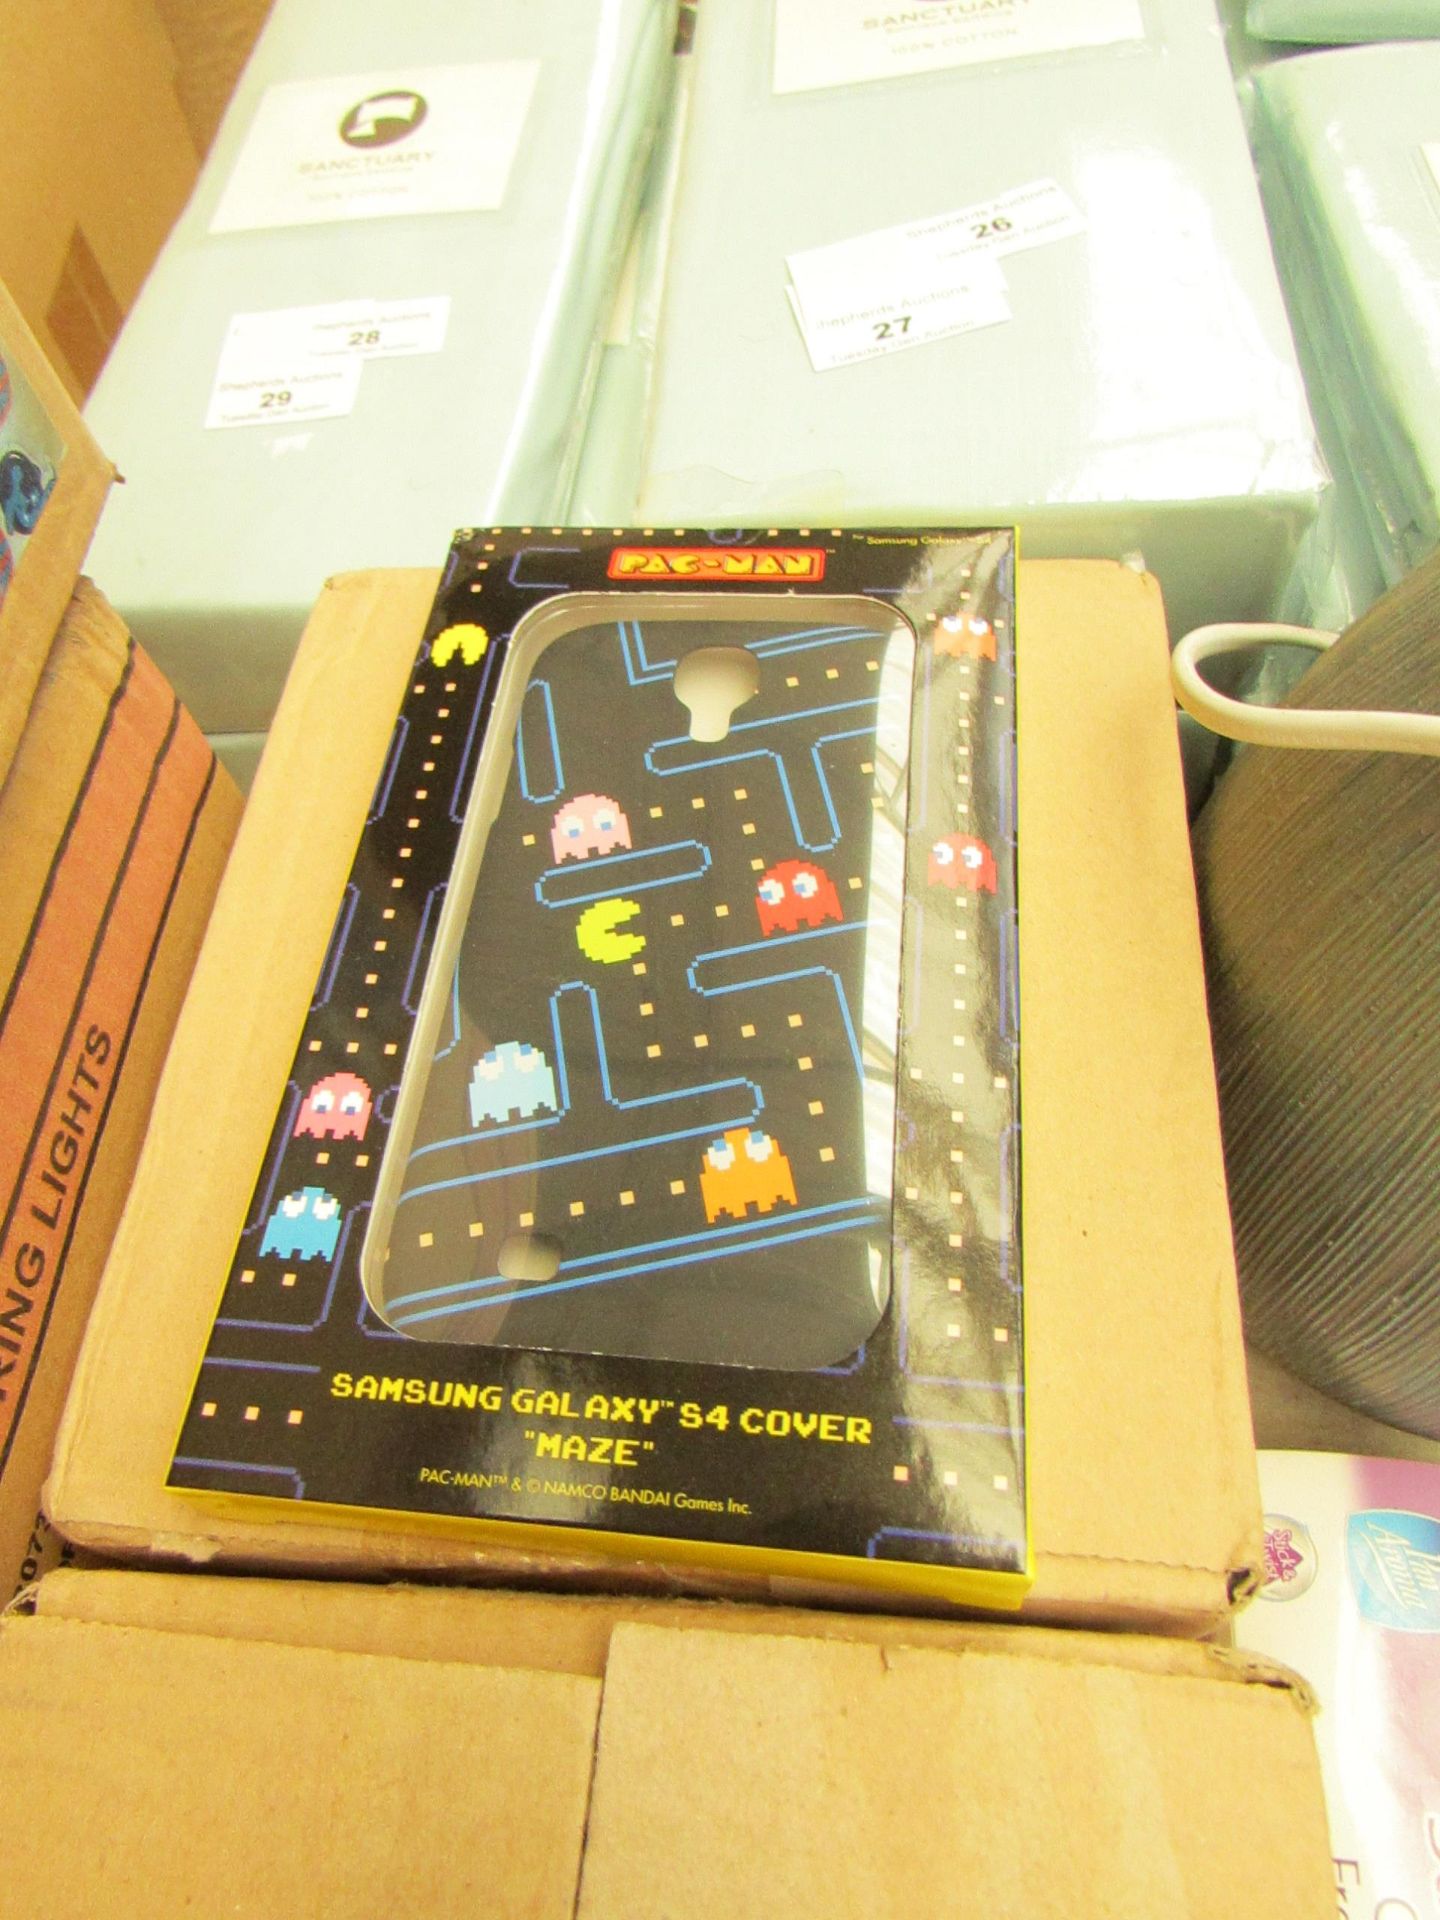 2x Boxes of 10 PCS - Samsung Galaxy S4 - Pac-Man "MAZE" Cases Covers - Packaged & Boxed.